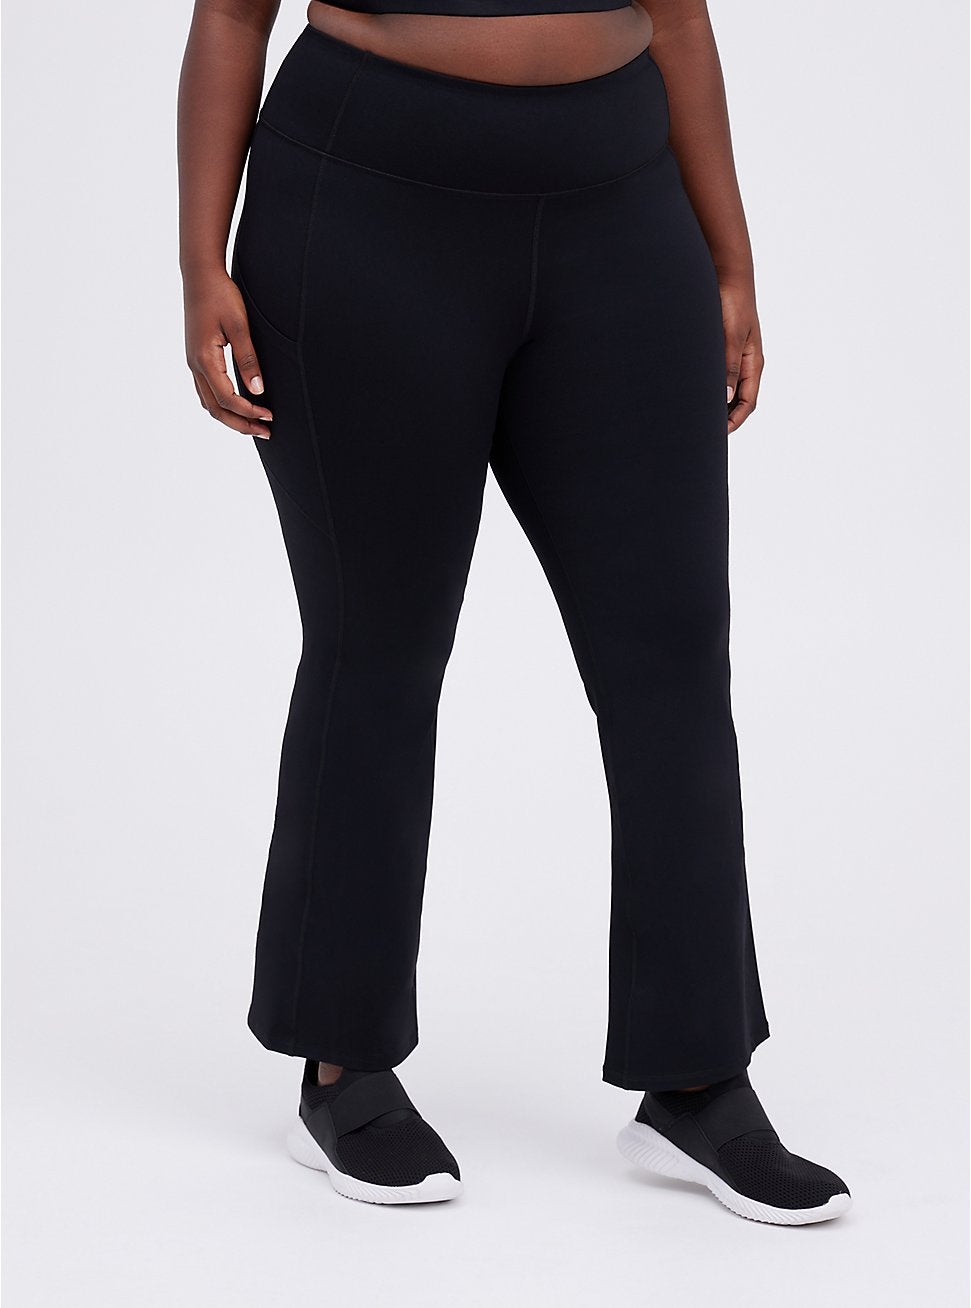 Torrid + Bootcut Wicking Active Yoga Pant with Pockets